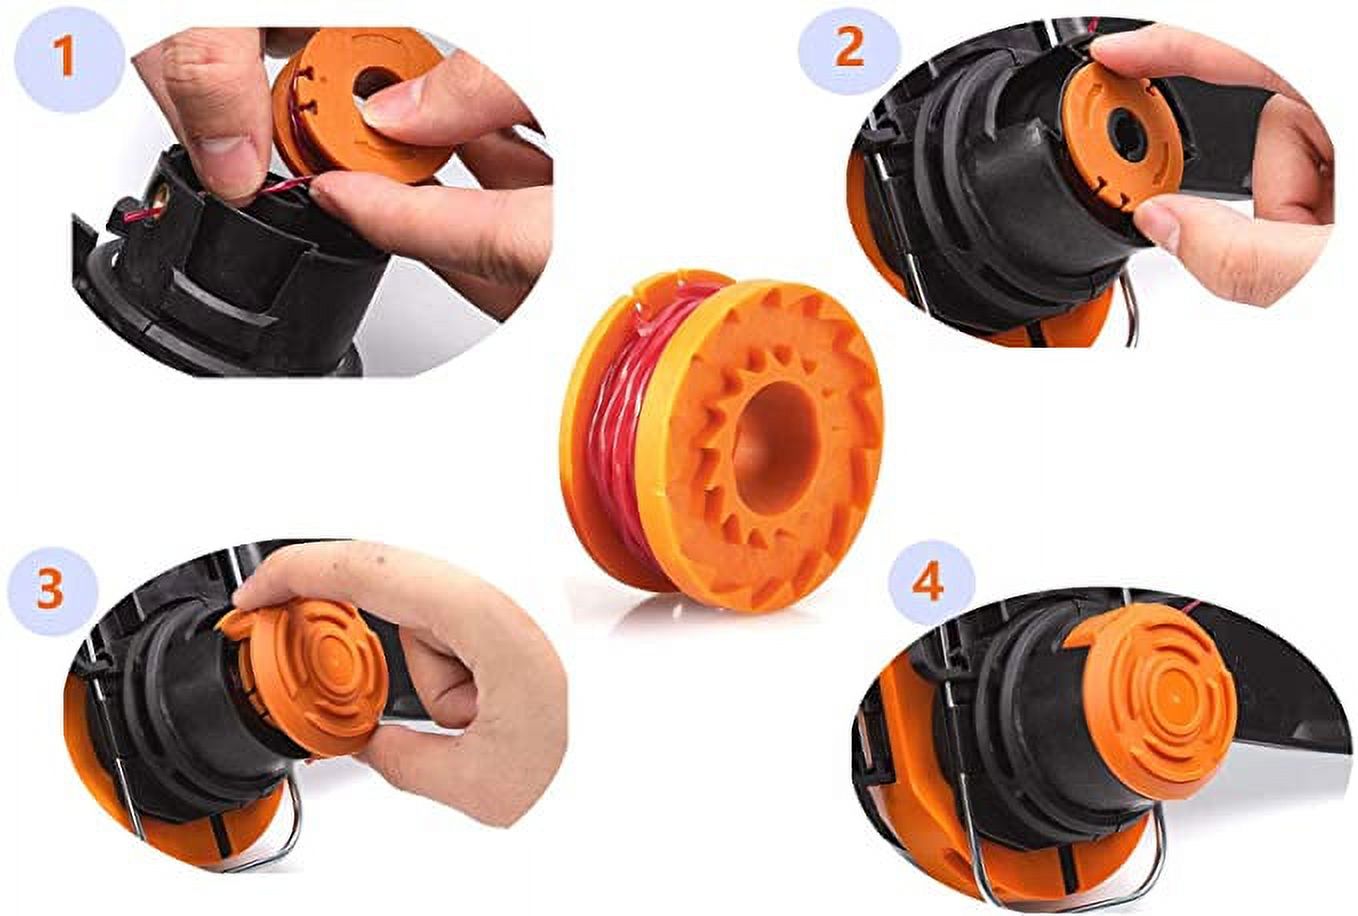 Trimmer Spool Line for Worx, (9 PCS) Edger Spool Compatible with Worx trimmer spools Weed Eater String,Trimmer Line Refills 0.065 inch for Electric String Trimmers - image 2 of 7